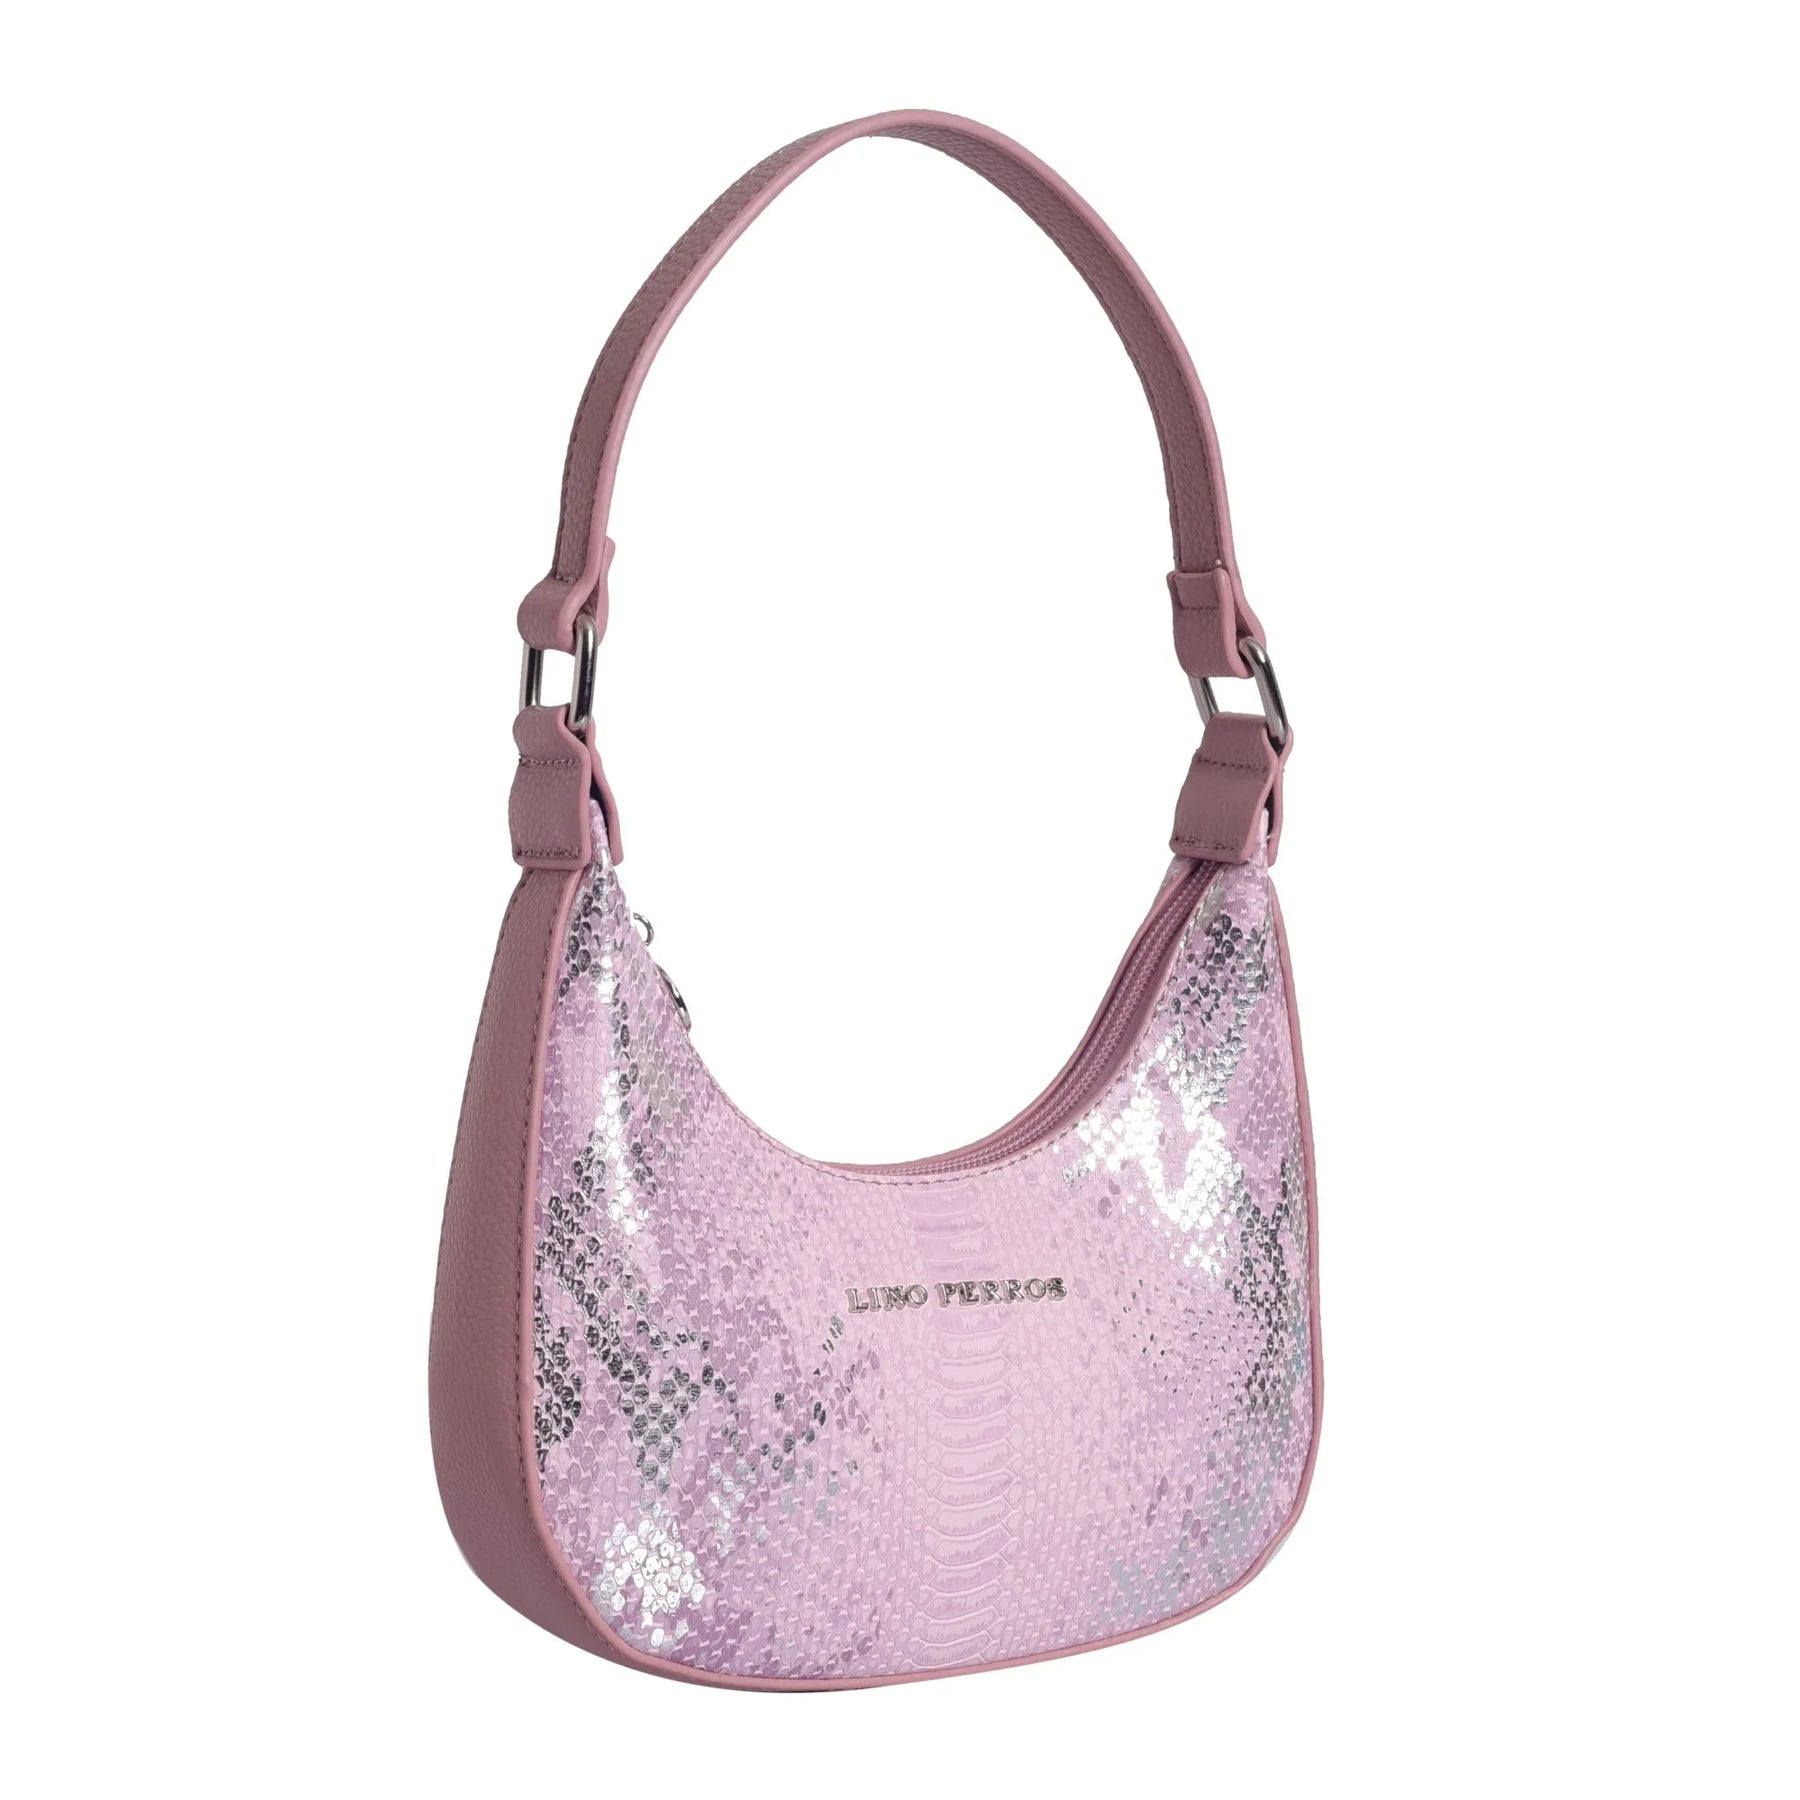 Juicy Couture Velour Shoulder Bag | Urban Outfitters UK